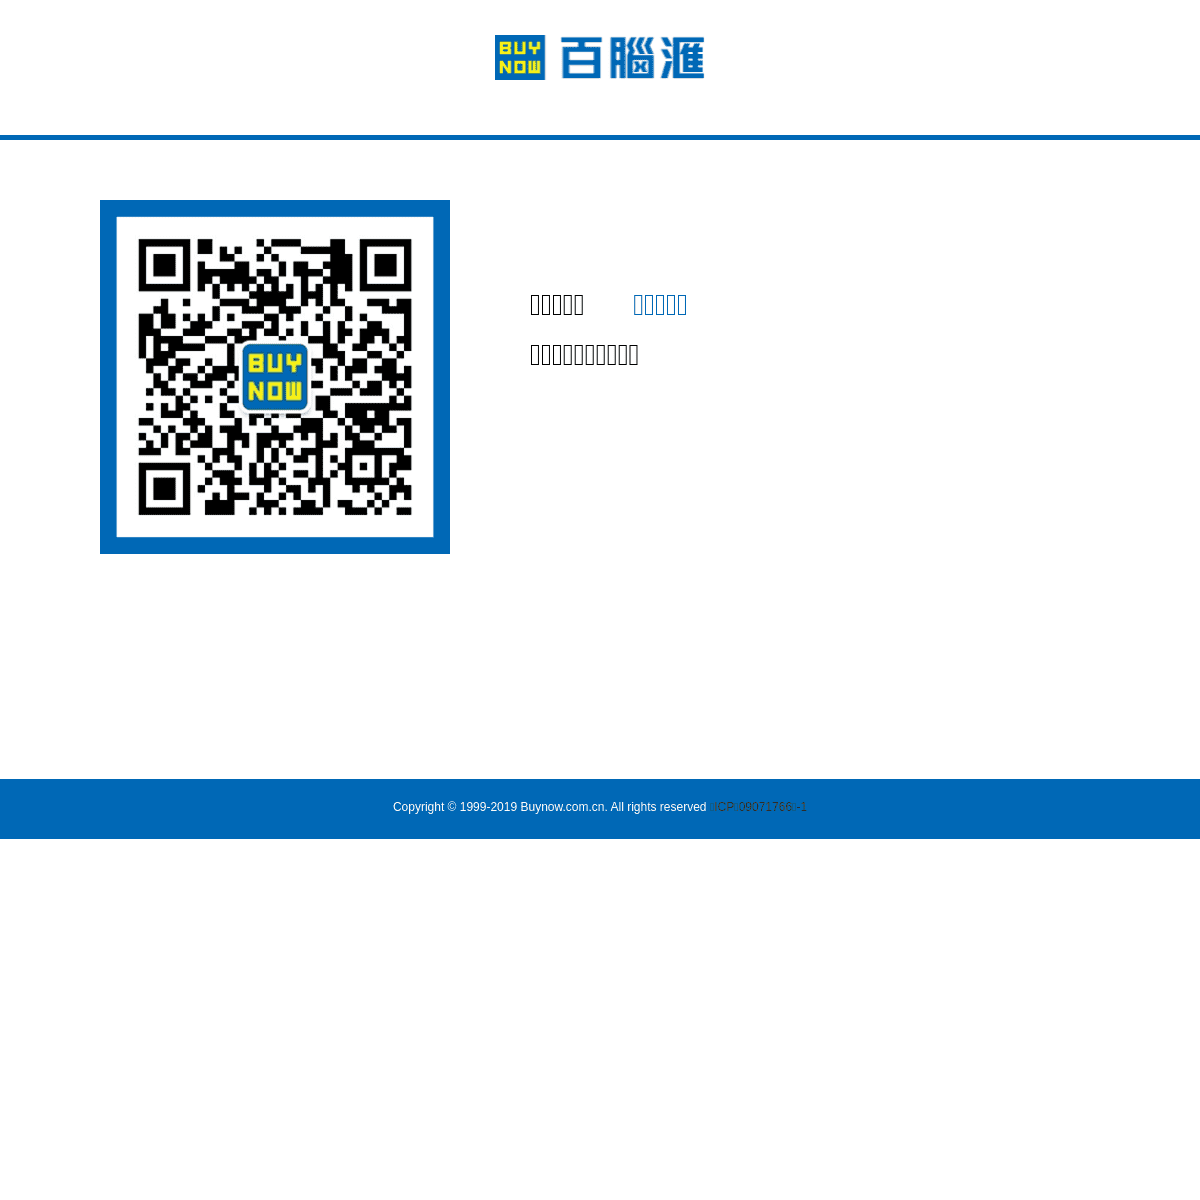 A complete backup of https://buynow.com.cn